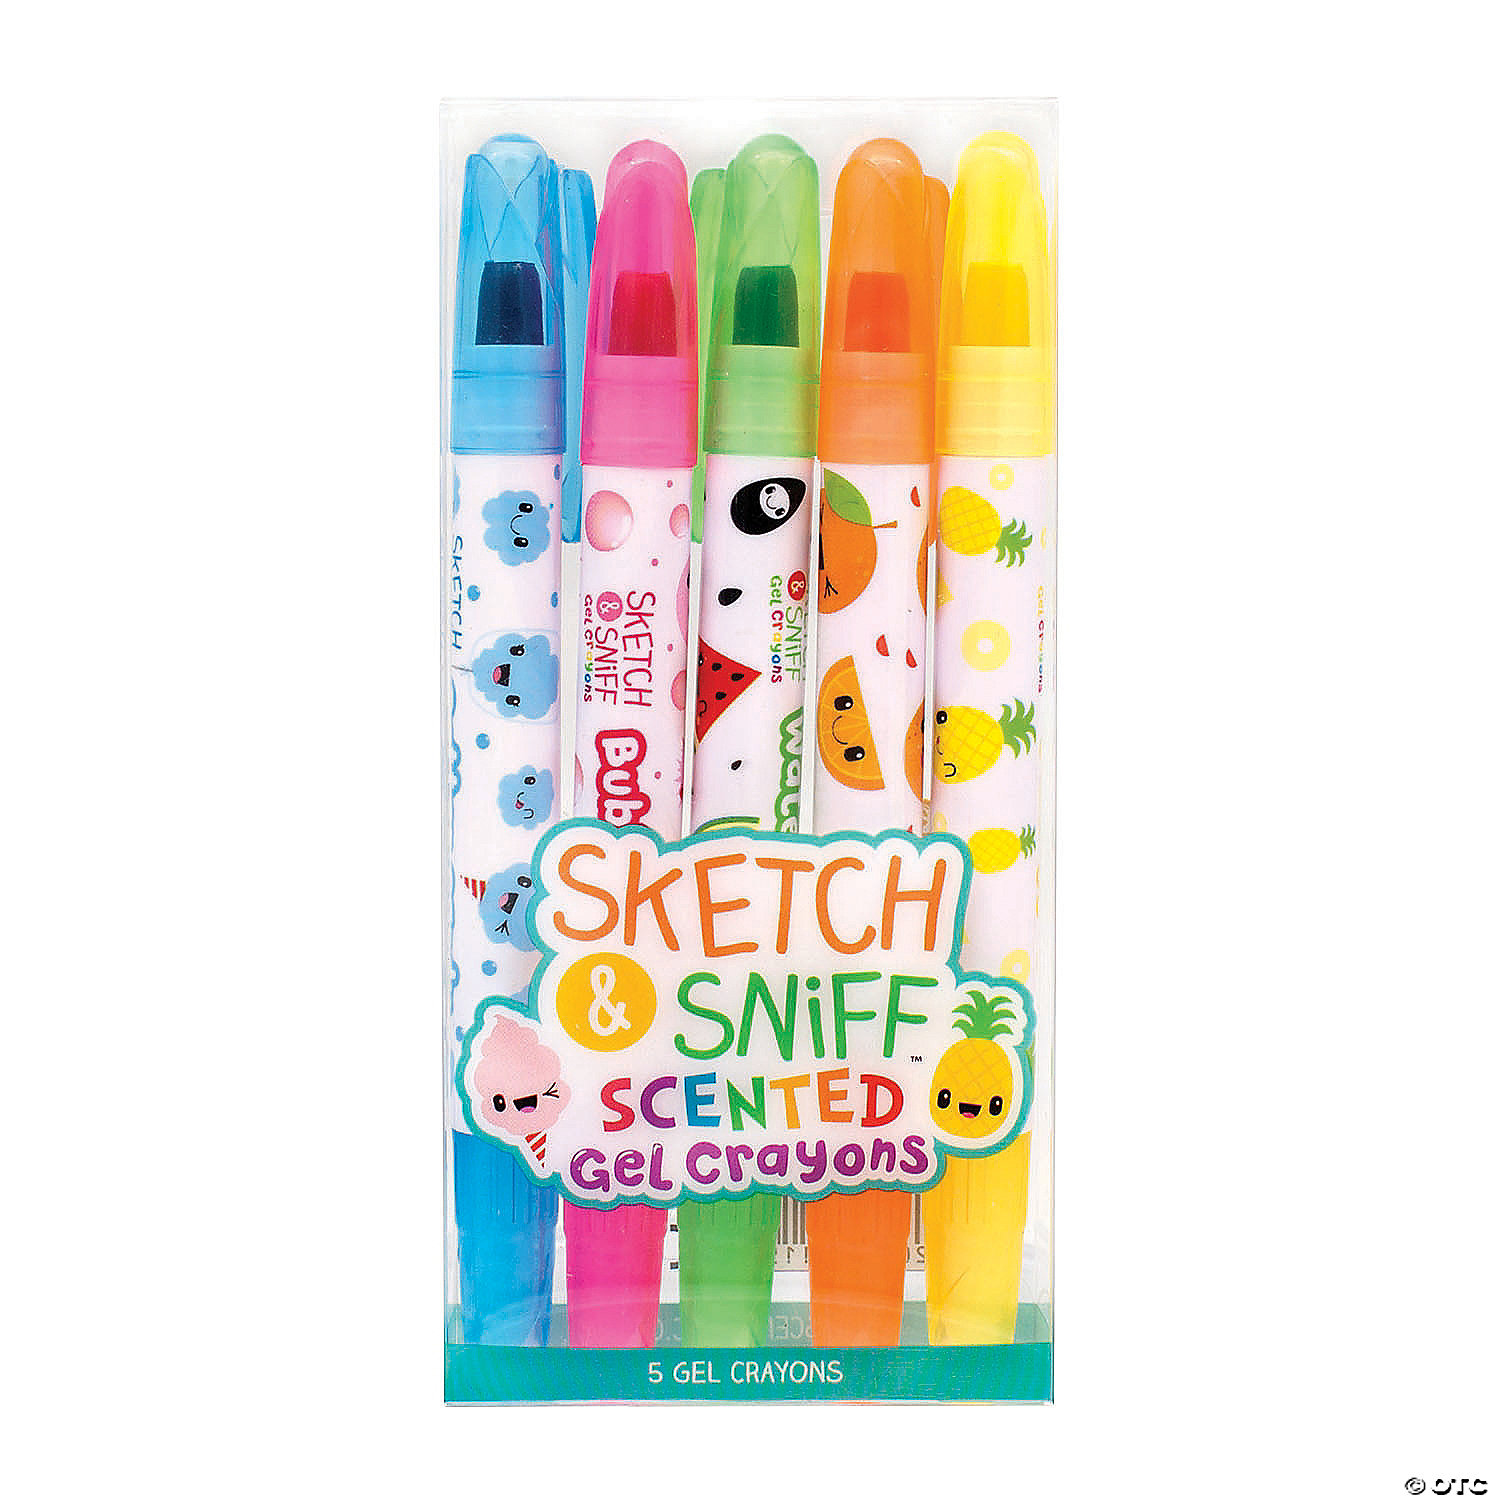 SKETCH & SNIFF SCENTED GEL CRAYONS 5 pcs 5 Different Colors 